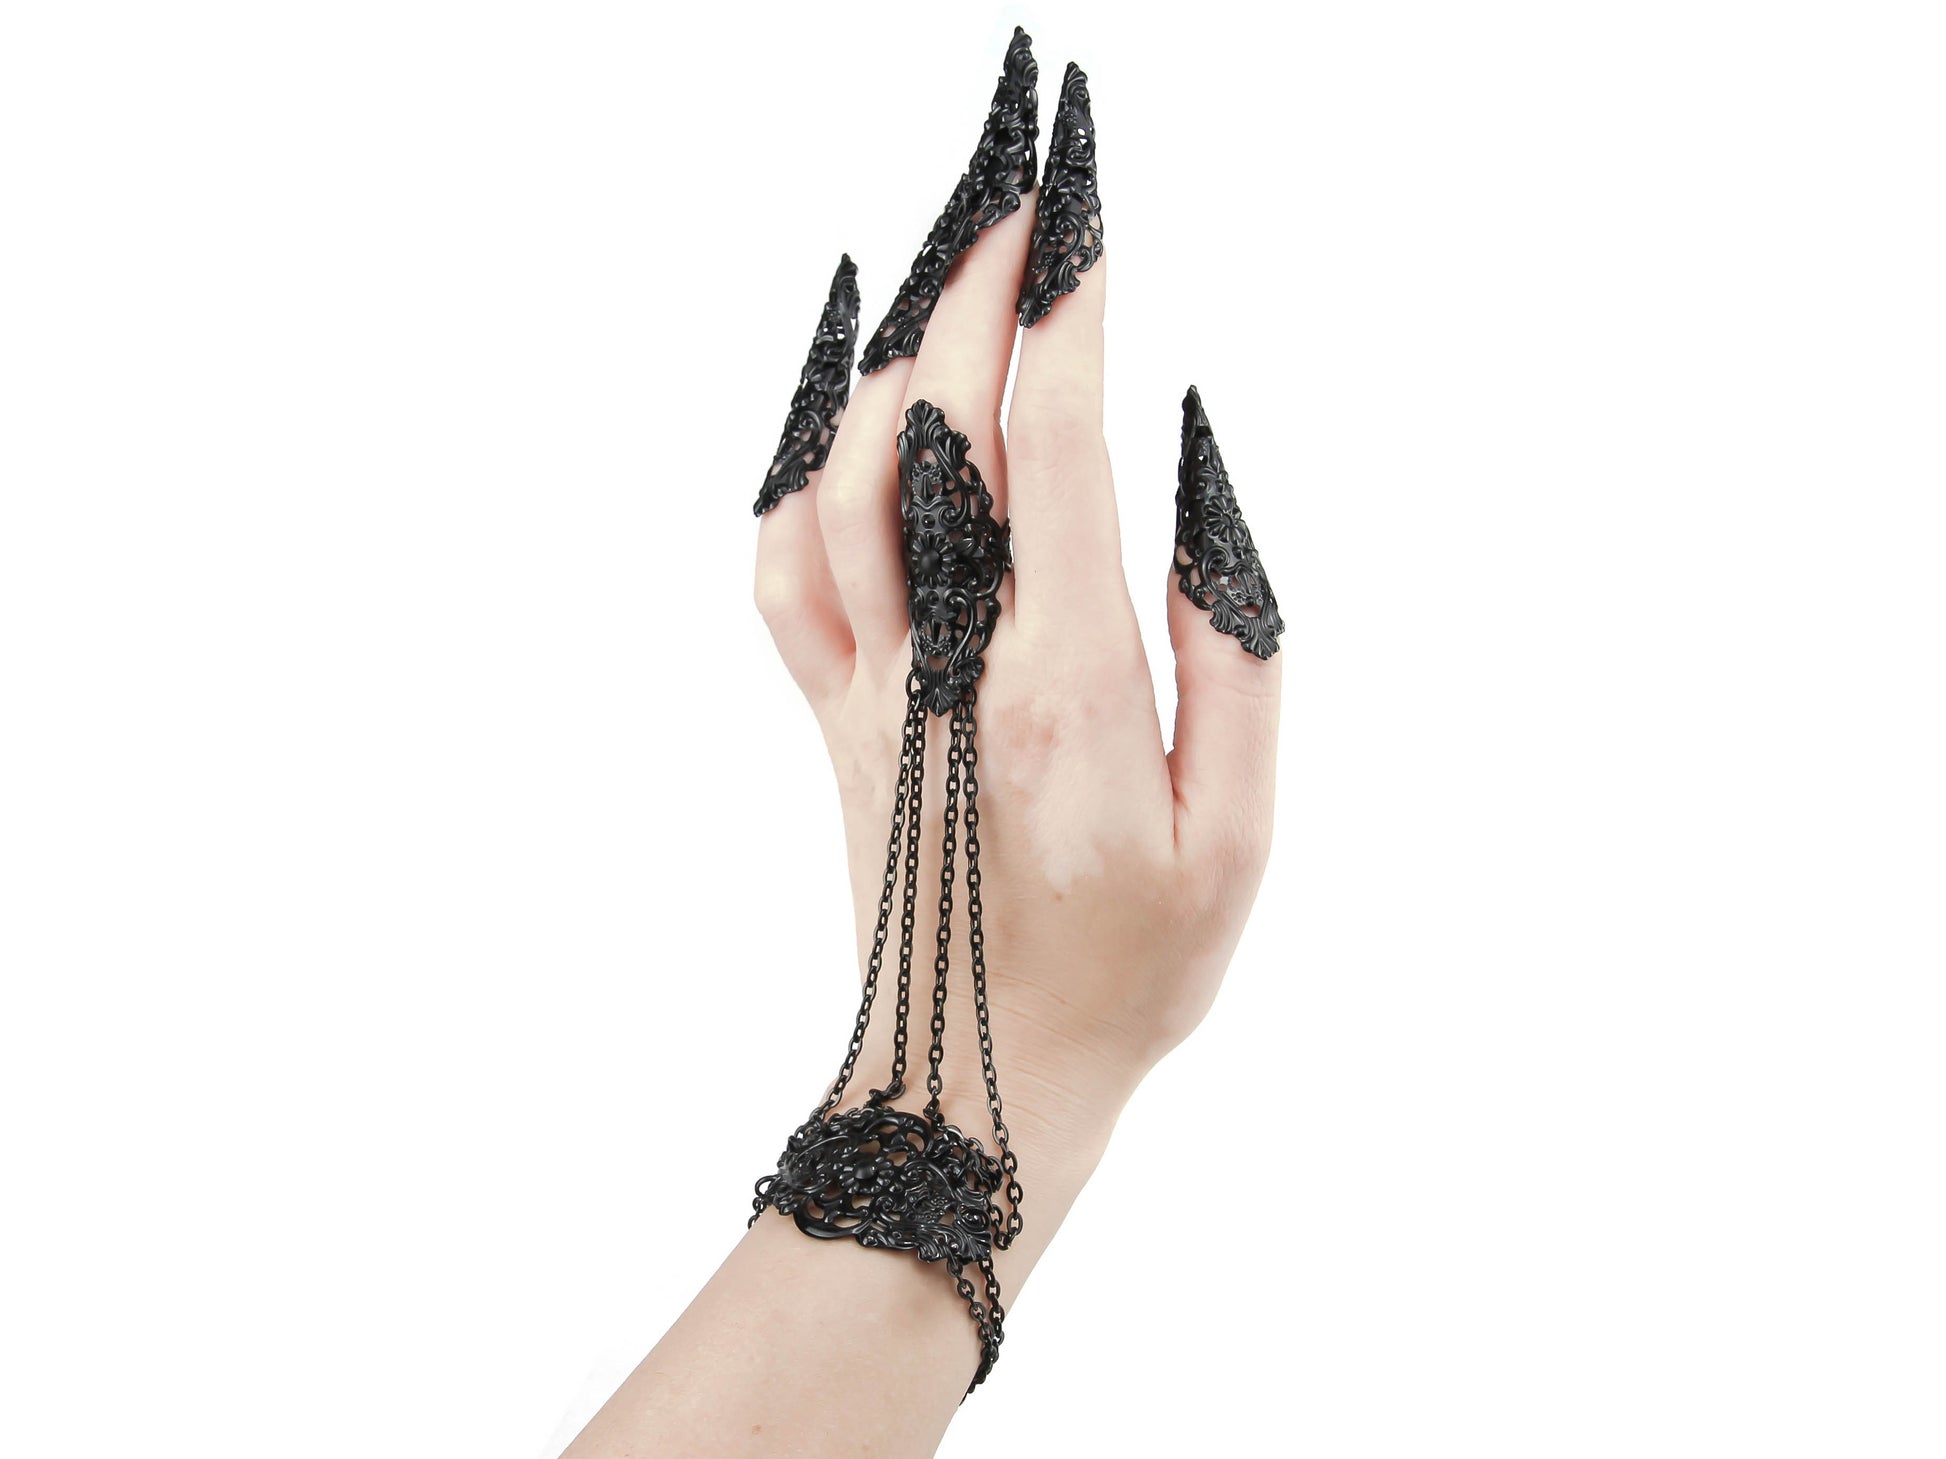 Experience the allure of gothic fashion with this luxurious silver hand chain adorned with black sharp nail claws. Its gothic-inspired design features intricate filigree metalwork on the hand, connected to a middle finger ring by elegant chains. Against a crisp white background, this meticulously crafted creation exudes refinement and mystery.